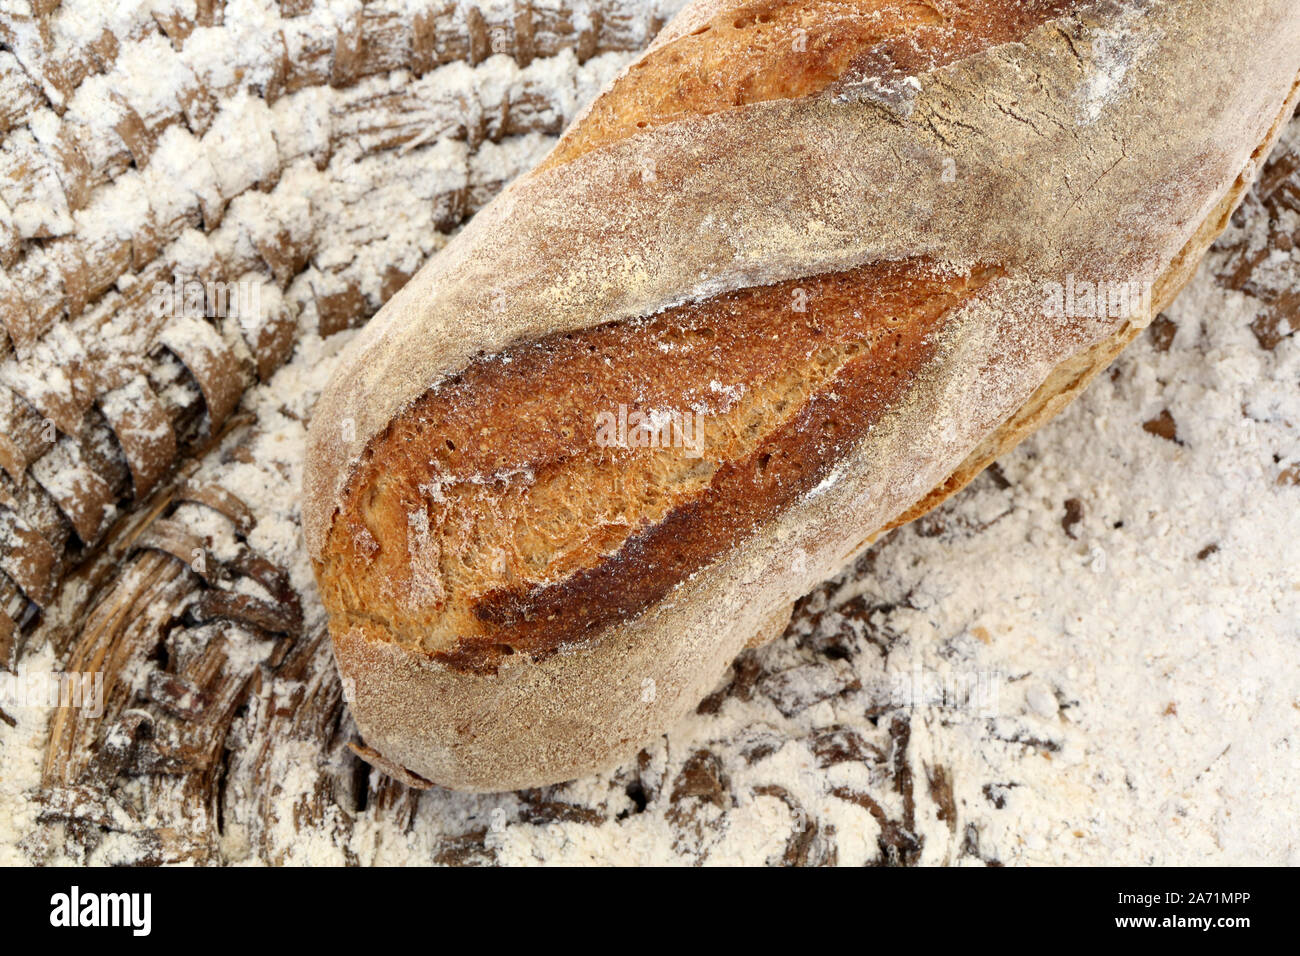 Fabrication artisanale de pains. / Traditional bread making. Stock Photo